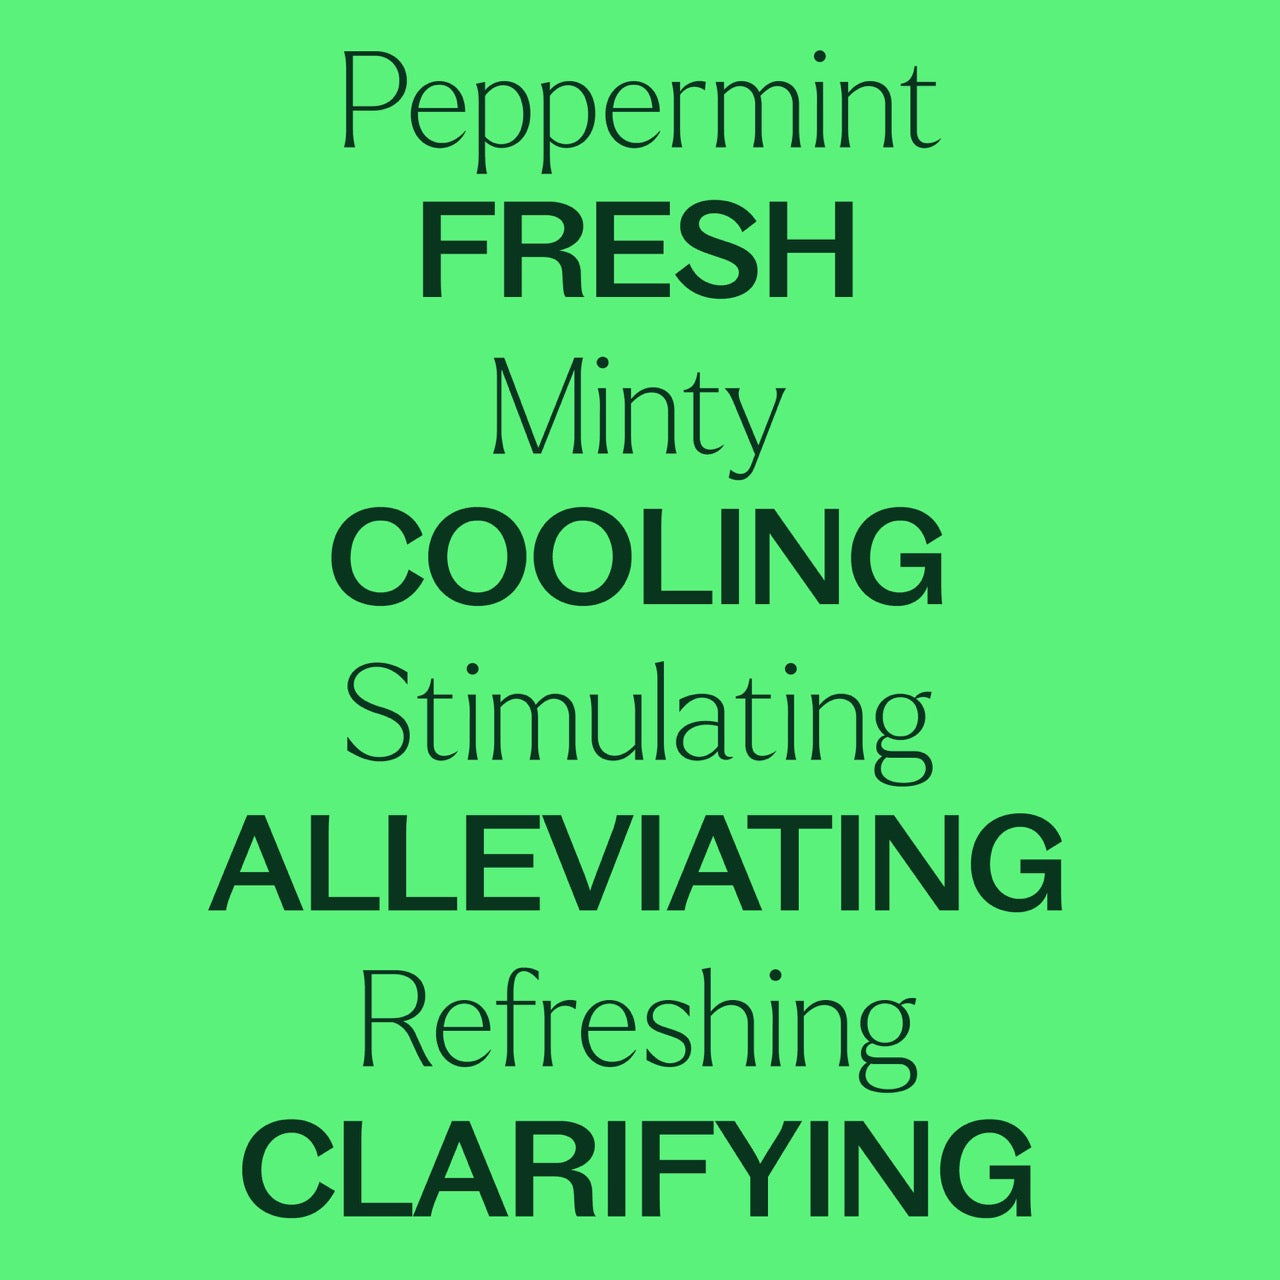 Peppermint Essential Oil key feature: fresh, minty, cooling, stimulating, alleviating, refreshing, and clarifying